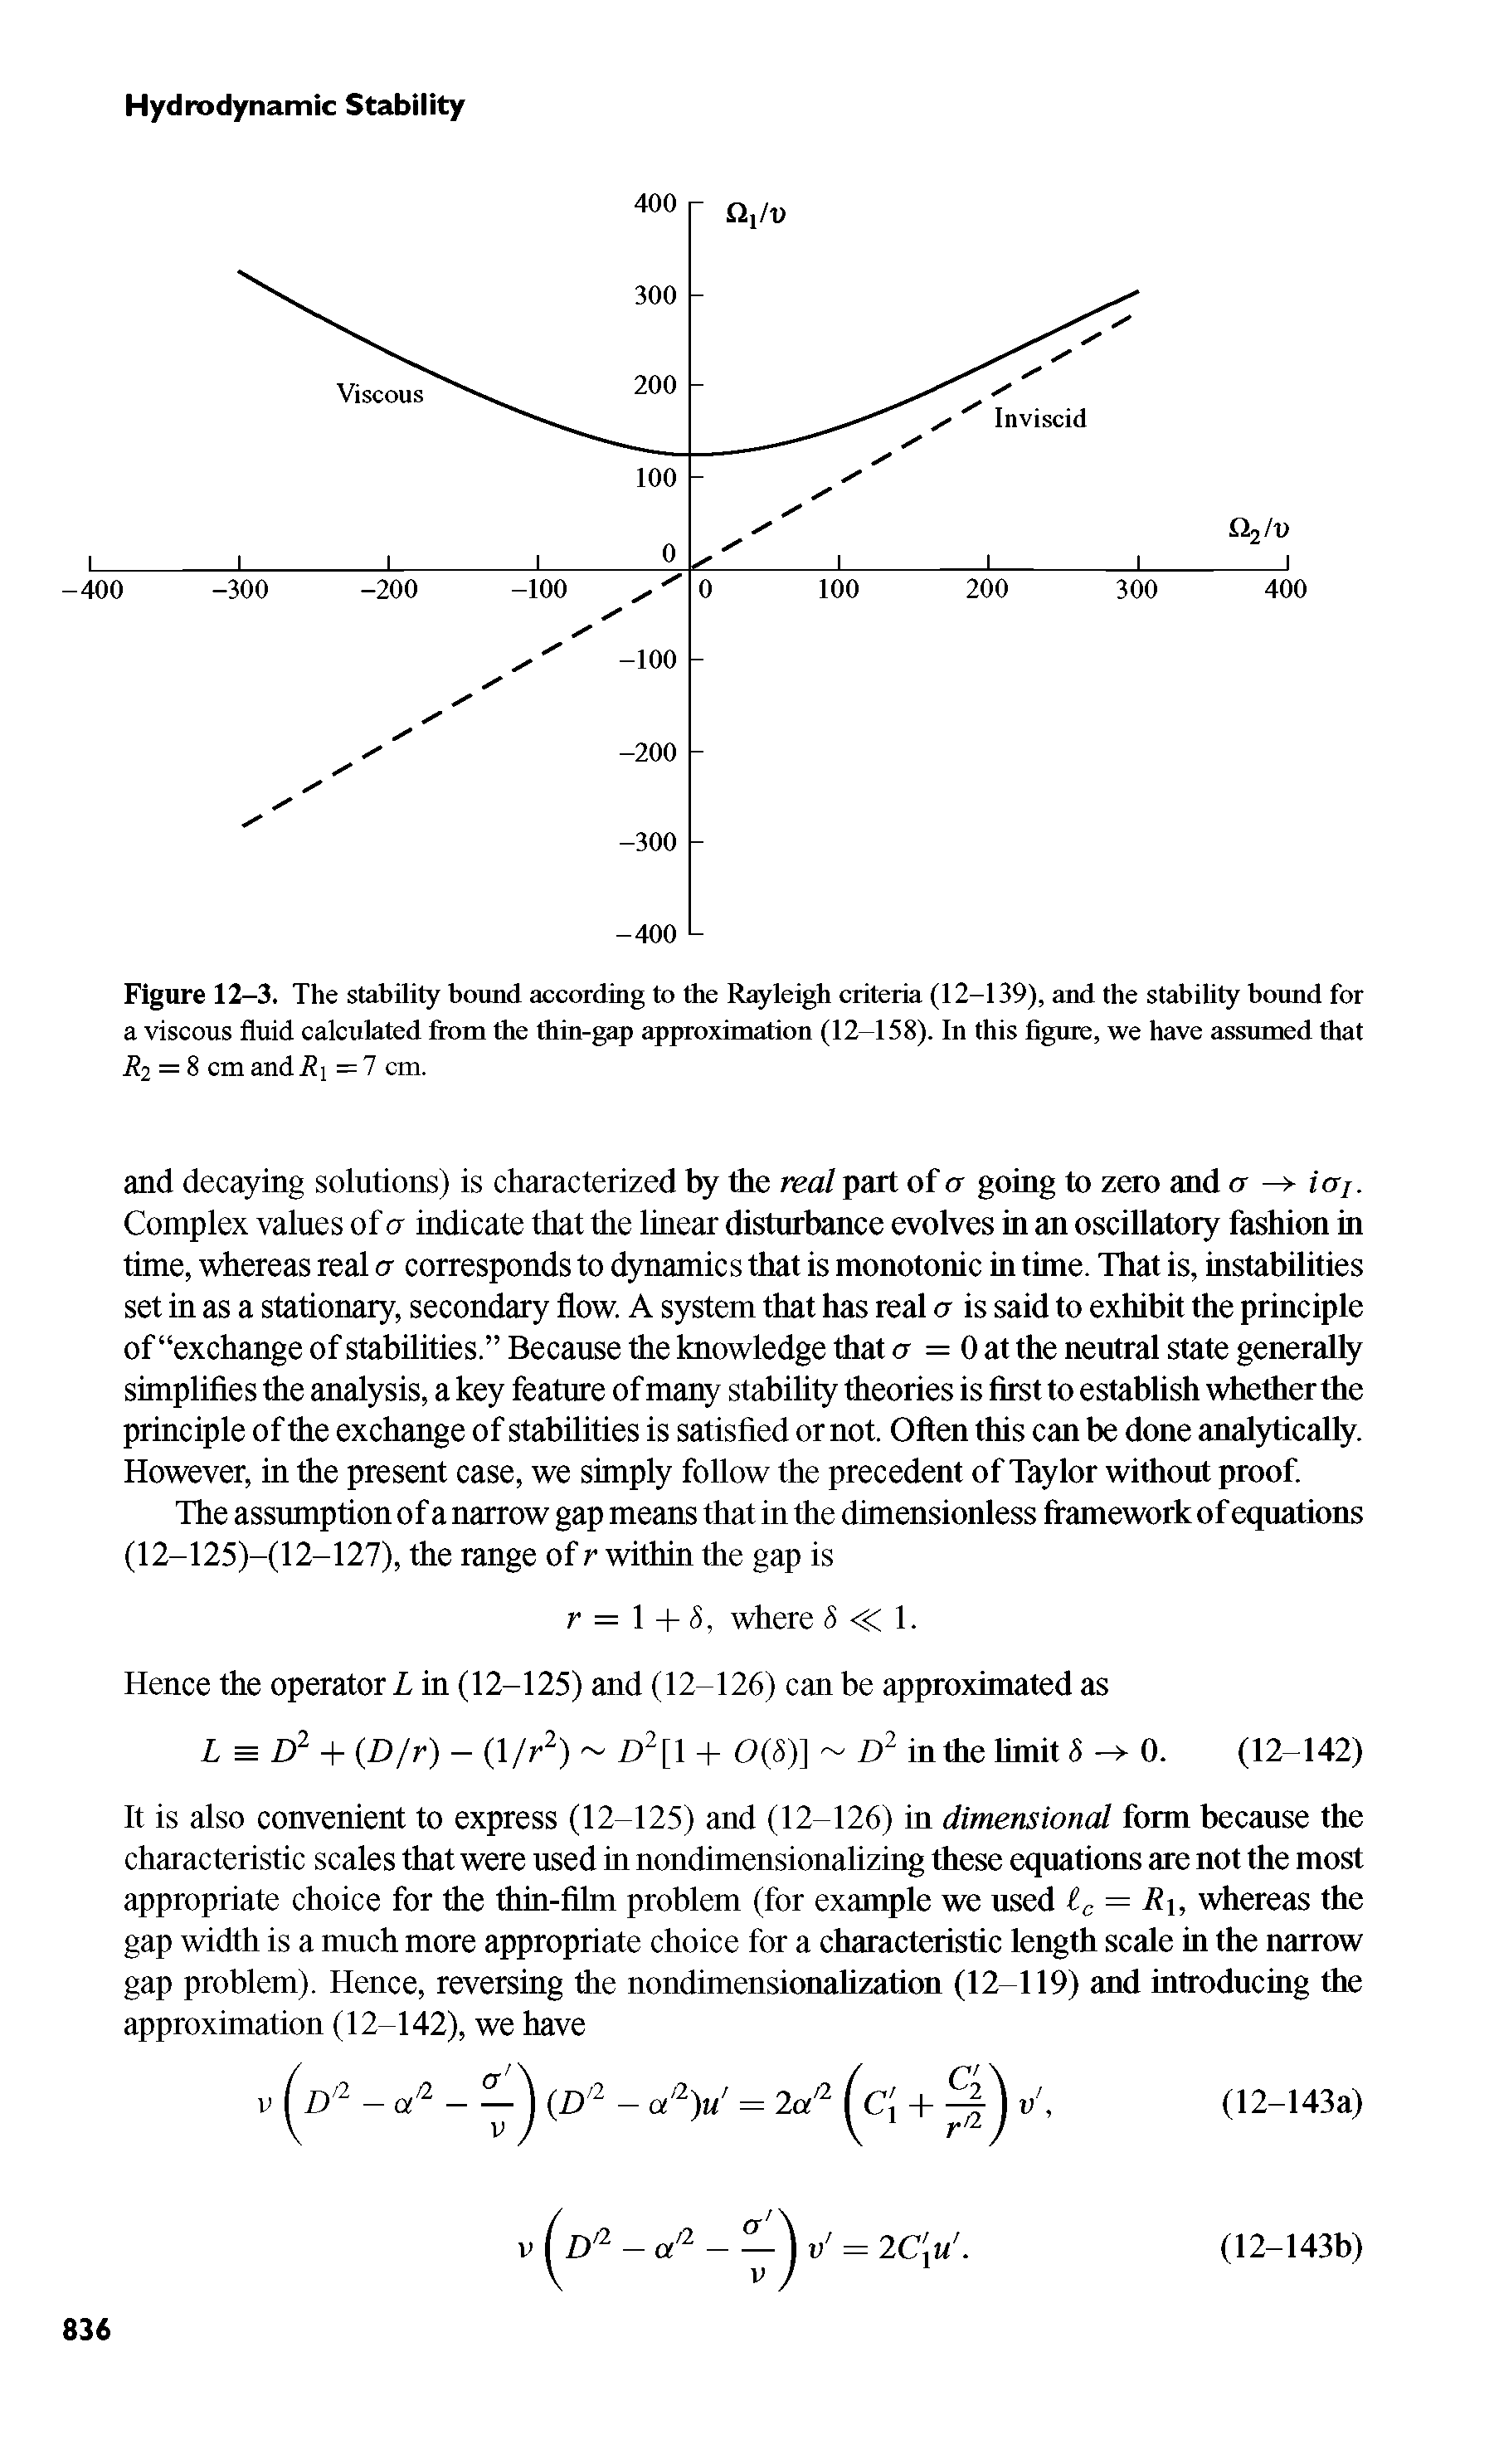 Figure 12-3. The stability bound according to the Rayleigh criteria (12-139), and the stability bound for a viscous fluid calculated from the thin-gap approximation (12-158). In this figure, we have assumed that = 8 cm and = 7 cm.